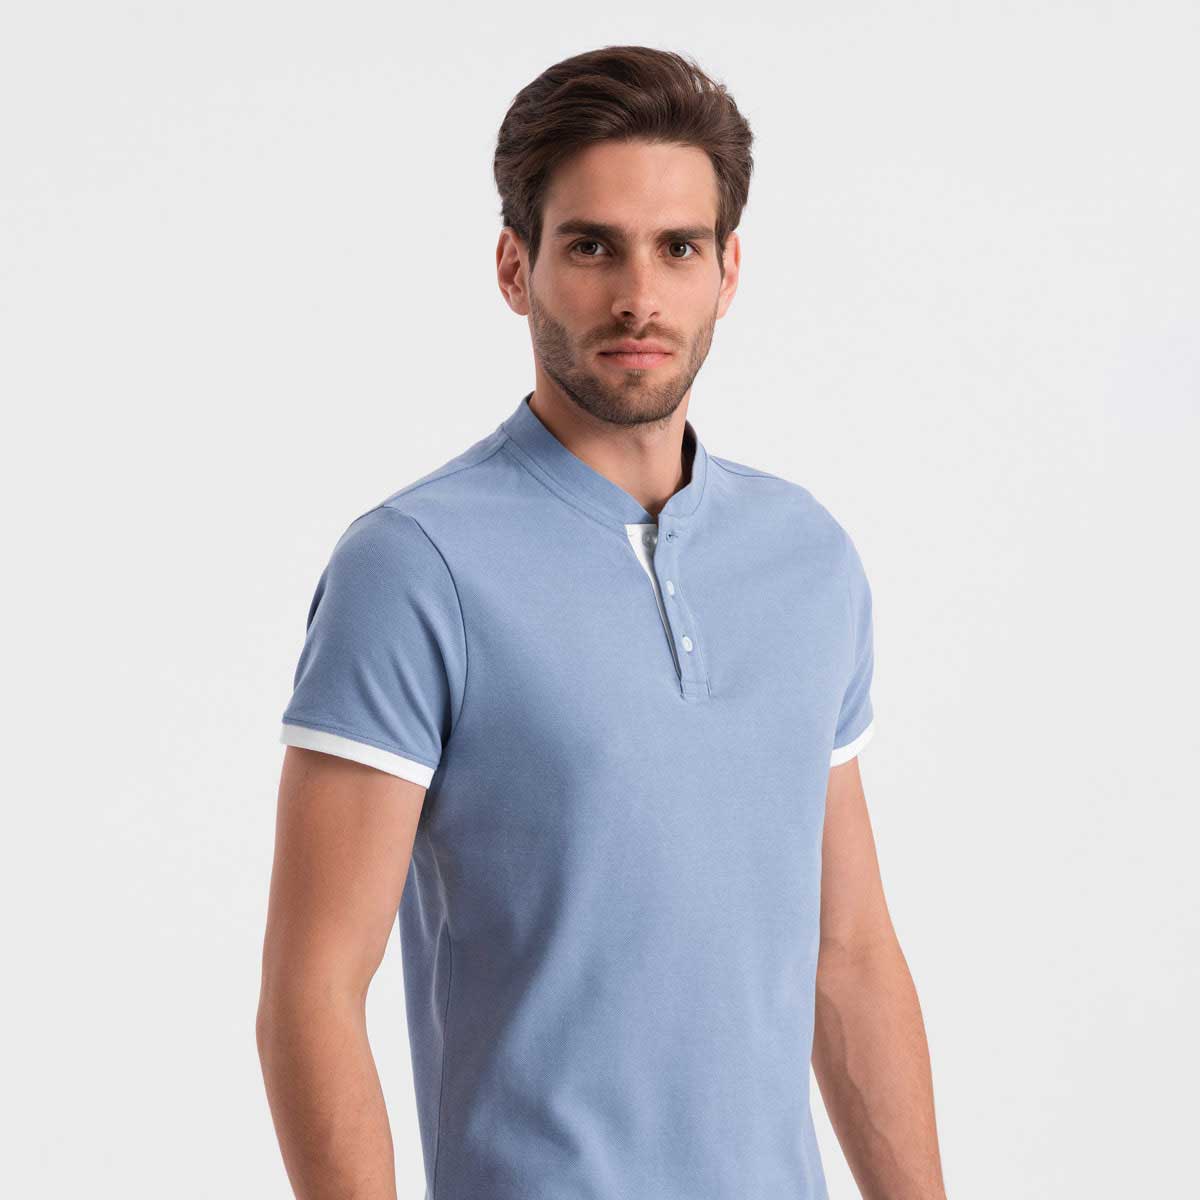 Wholesale Polo Shirts Manufacturers in Mirabel